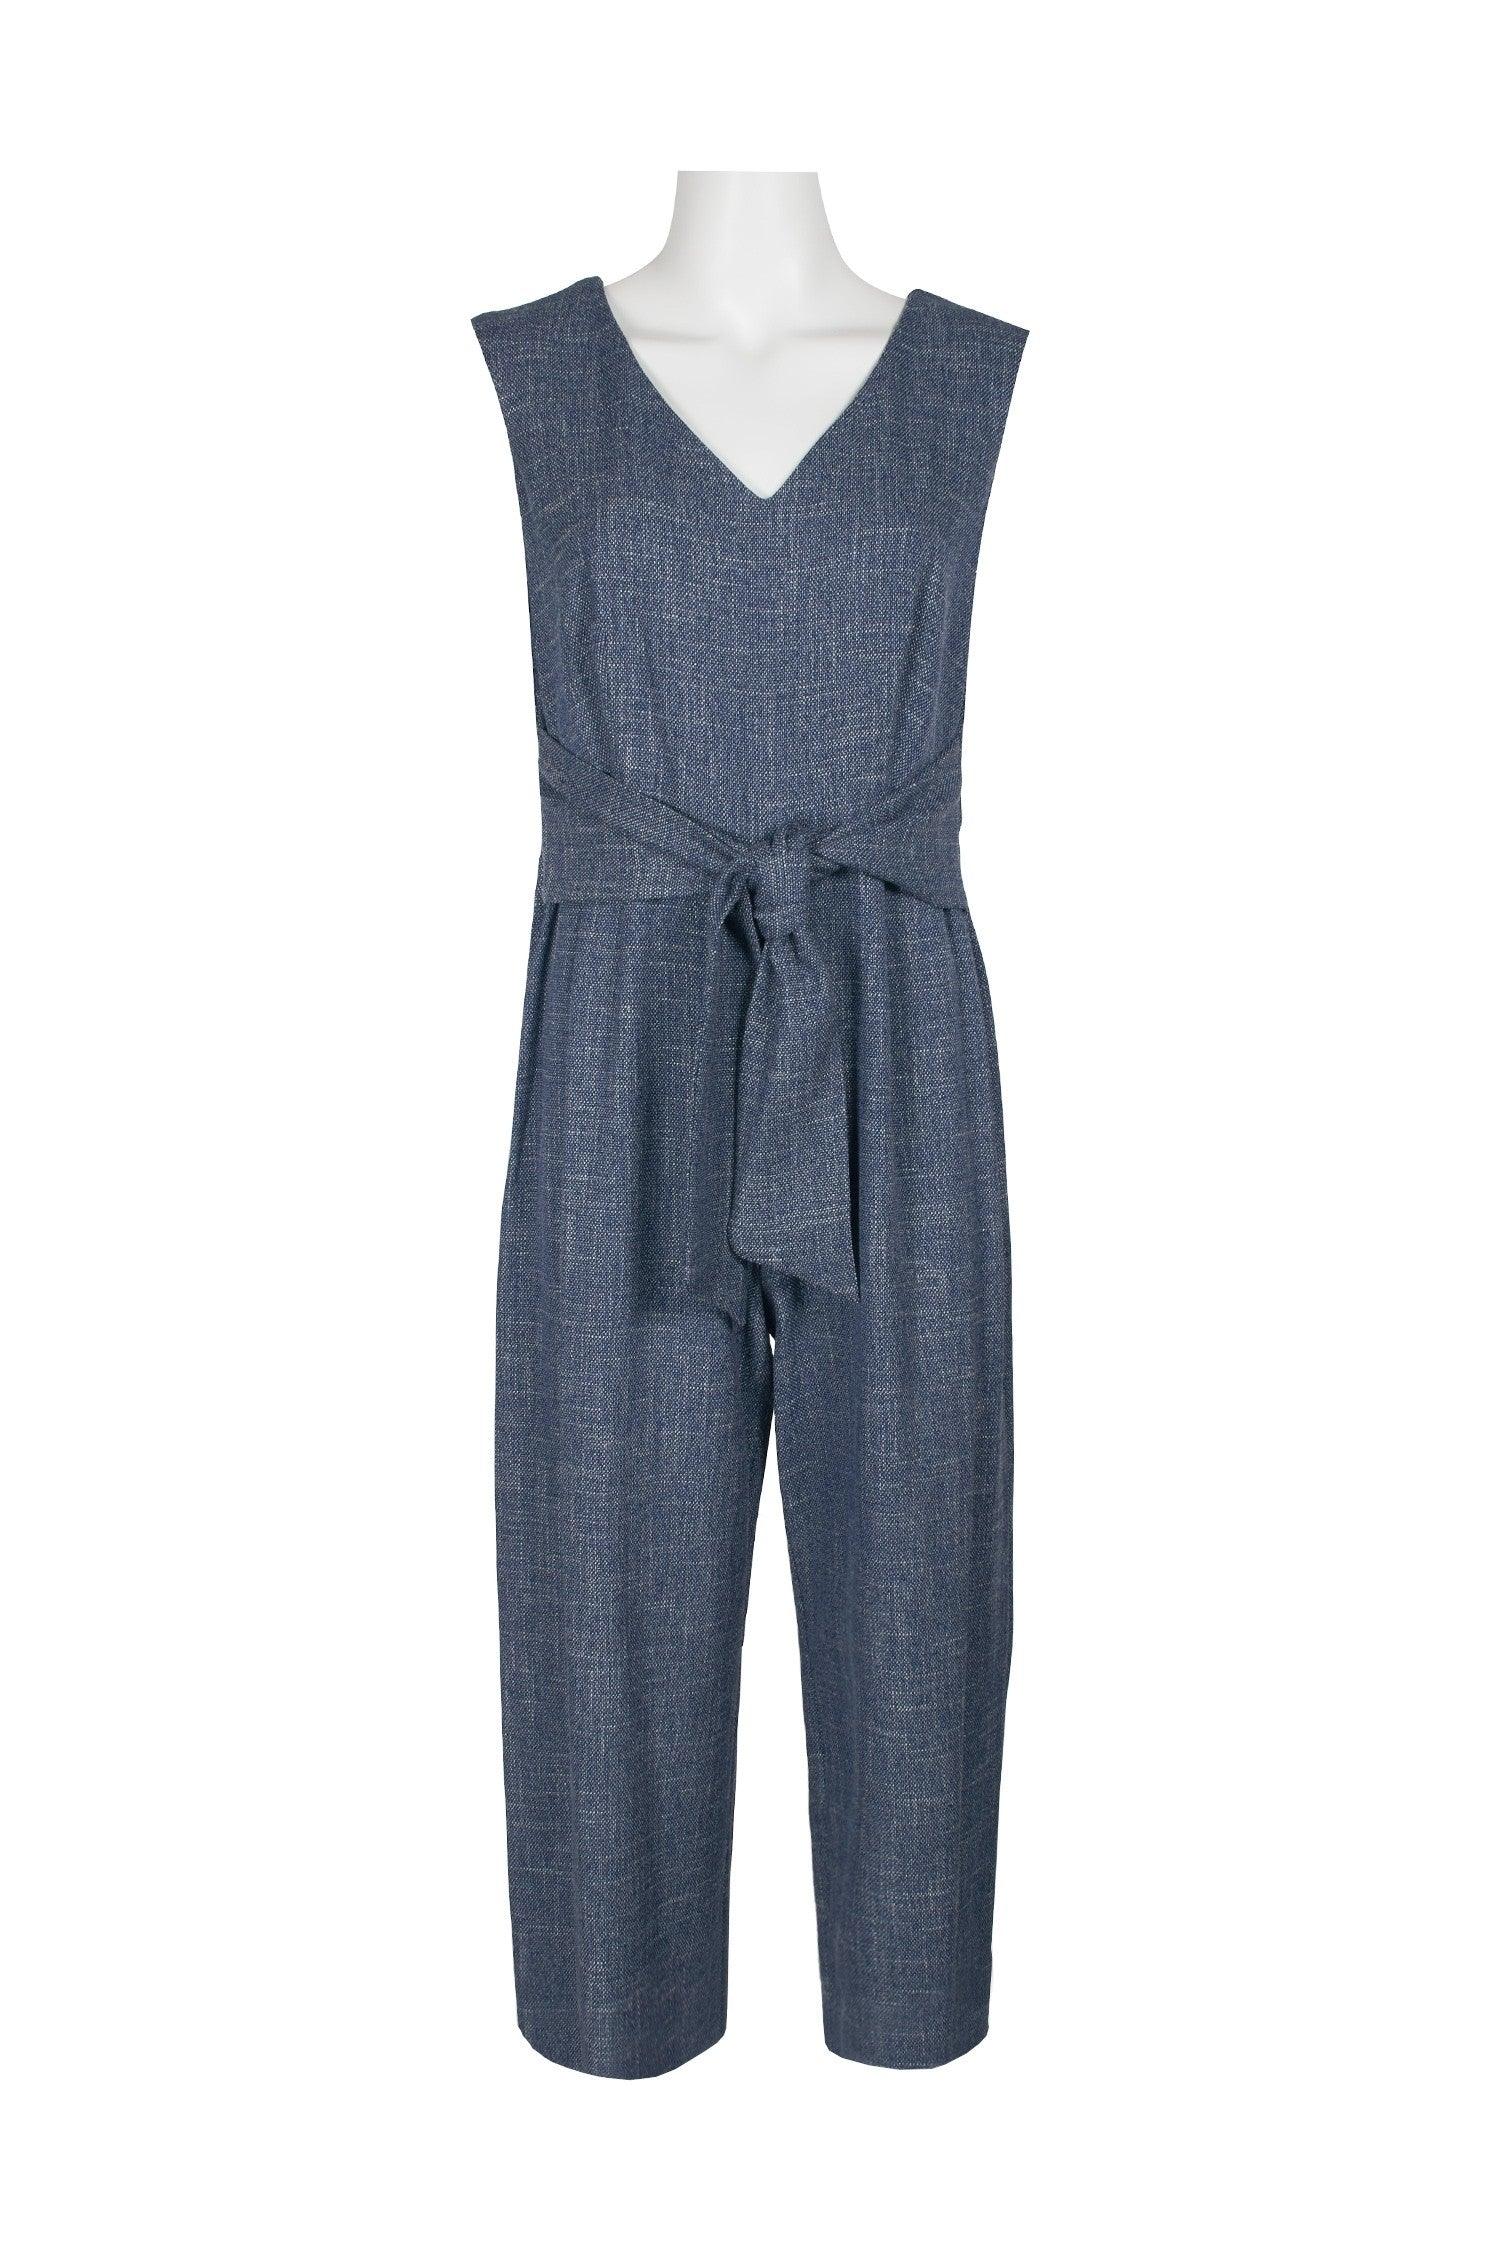 Connected Apparel Sleeveless Tie Waist Jumpsuit - The Dress Outlet